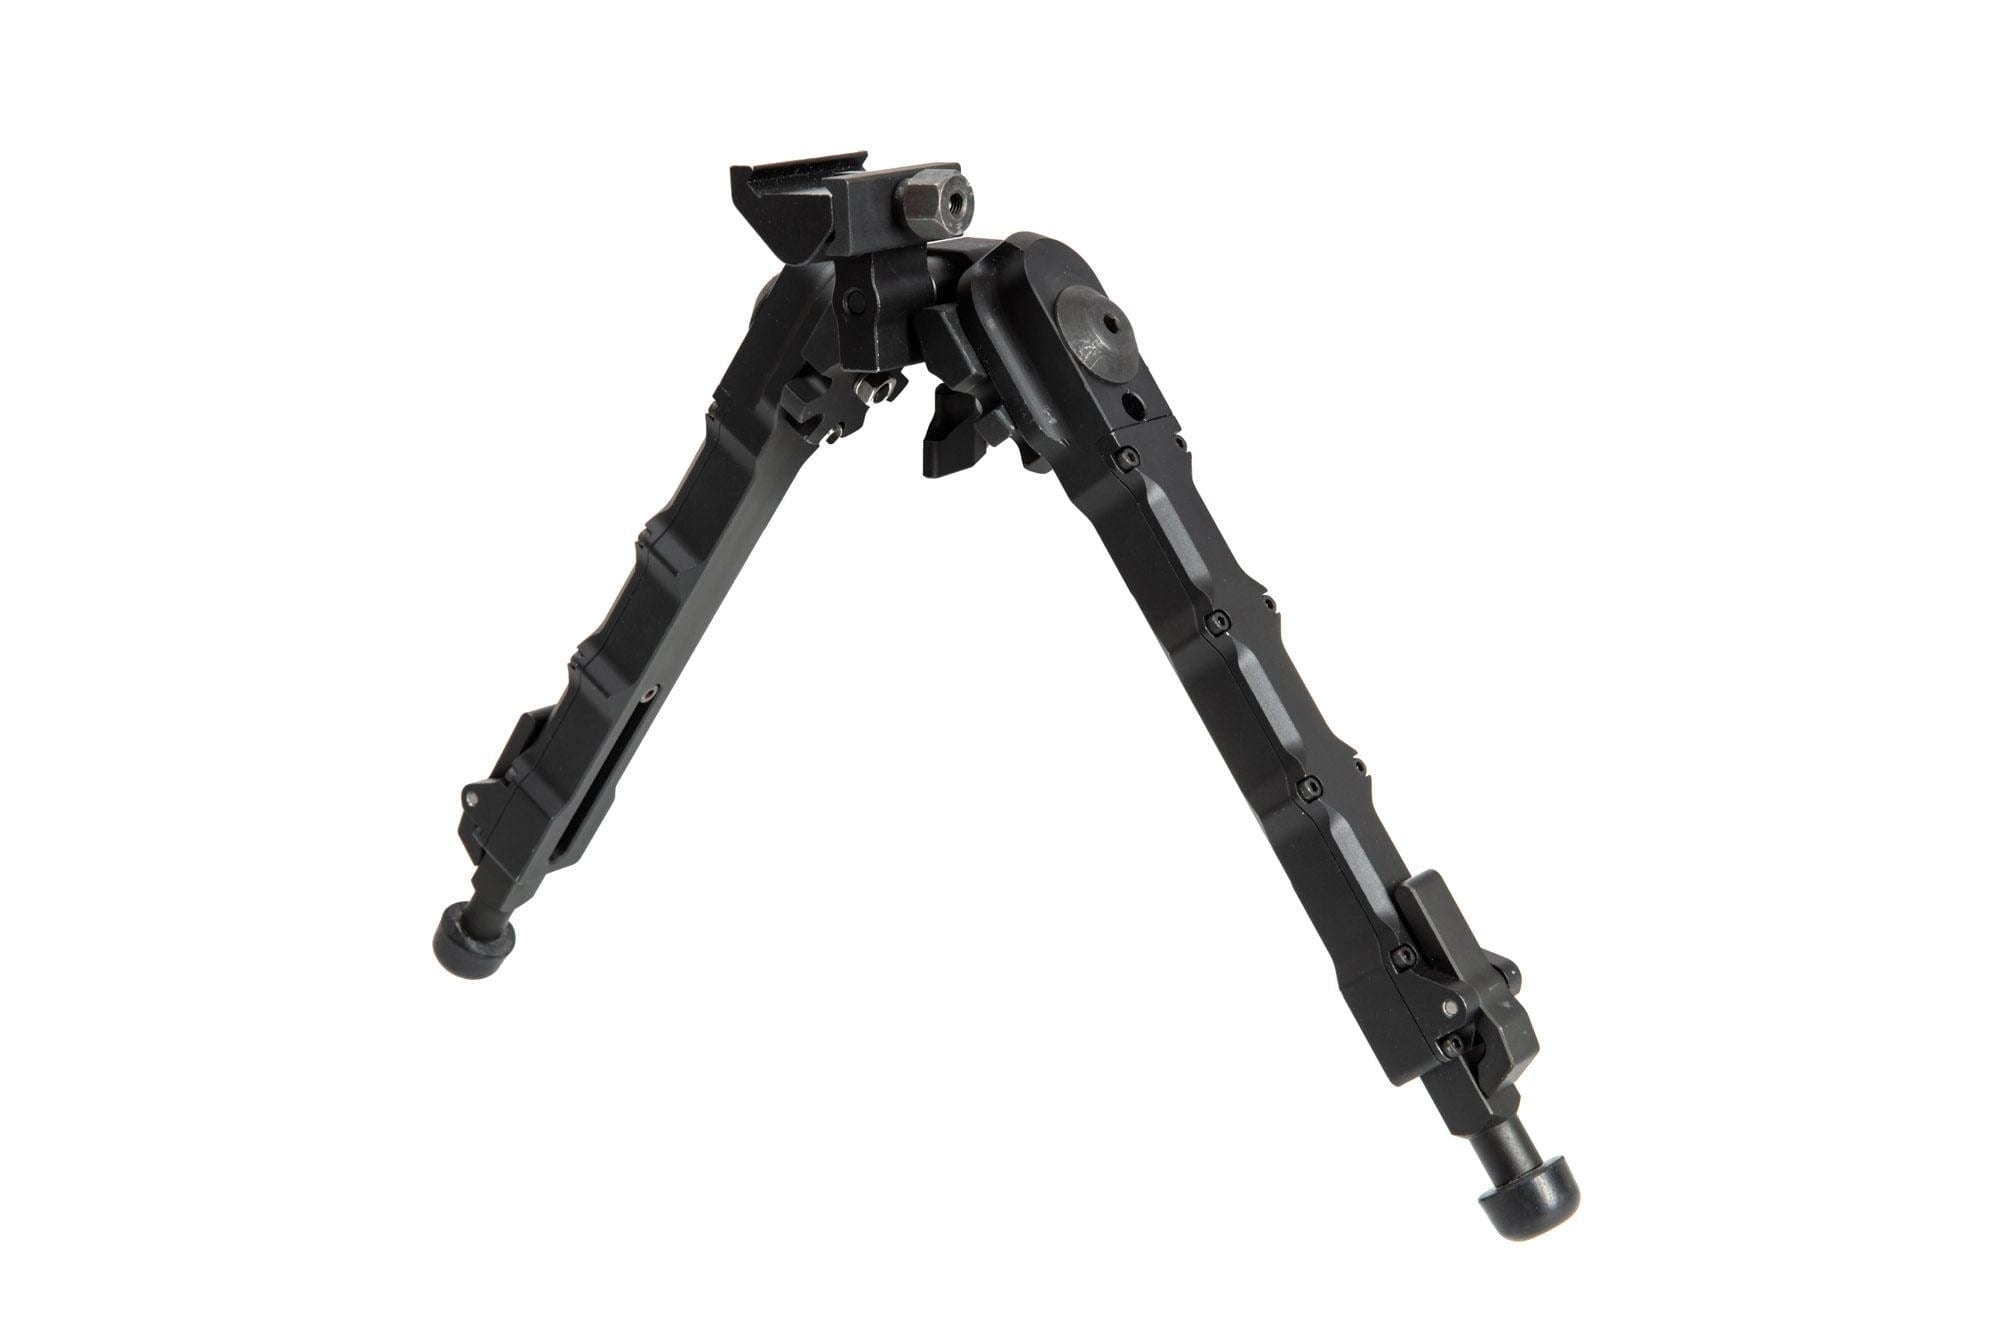 S5 Tactical Bipod for RIS Rail